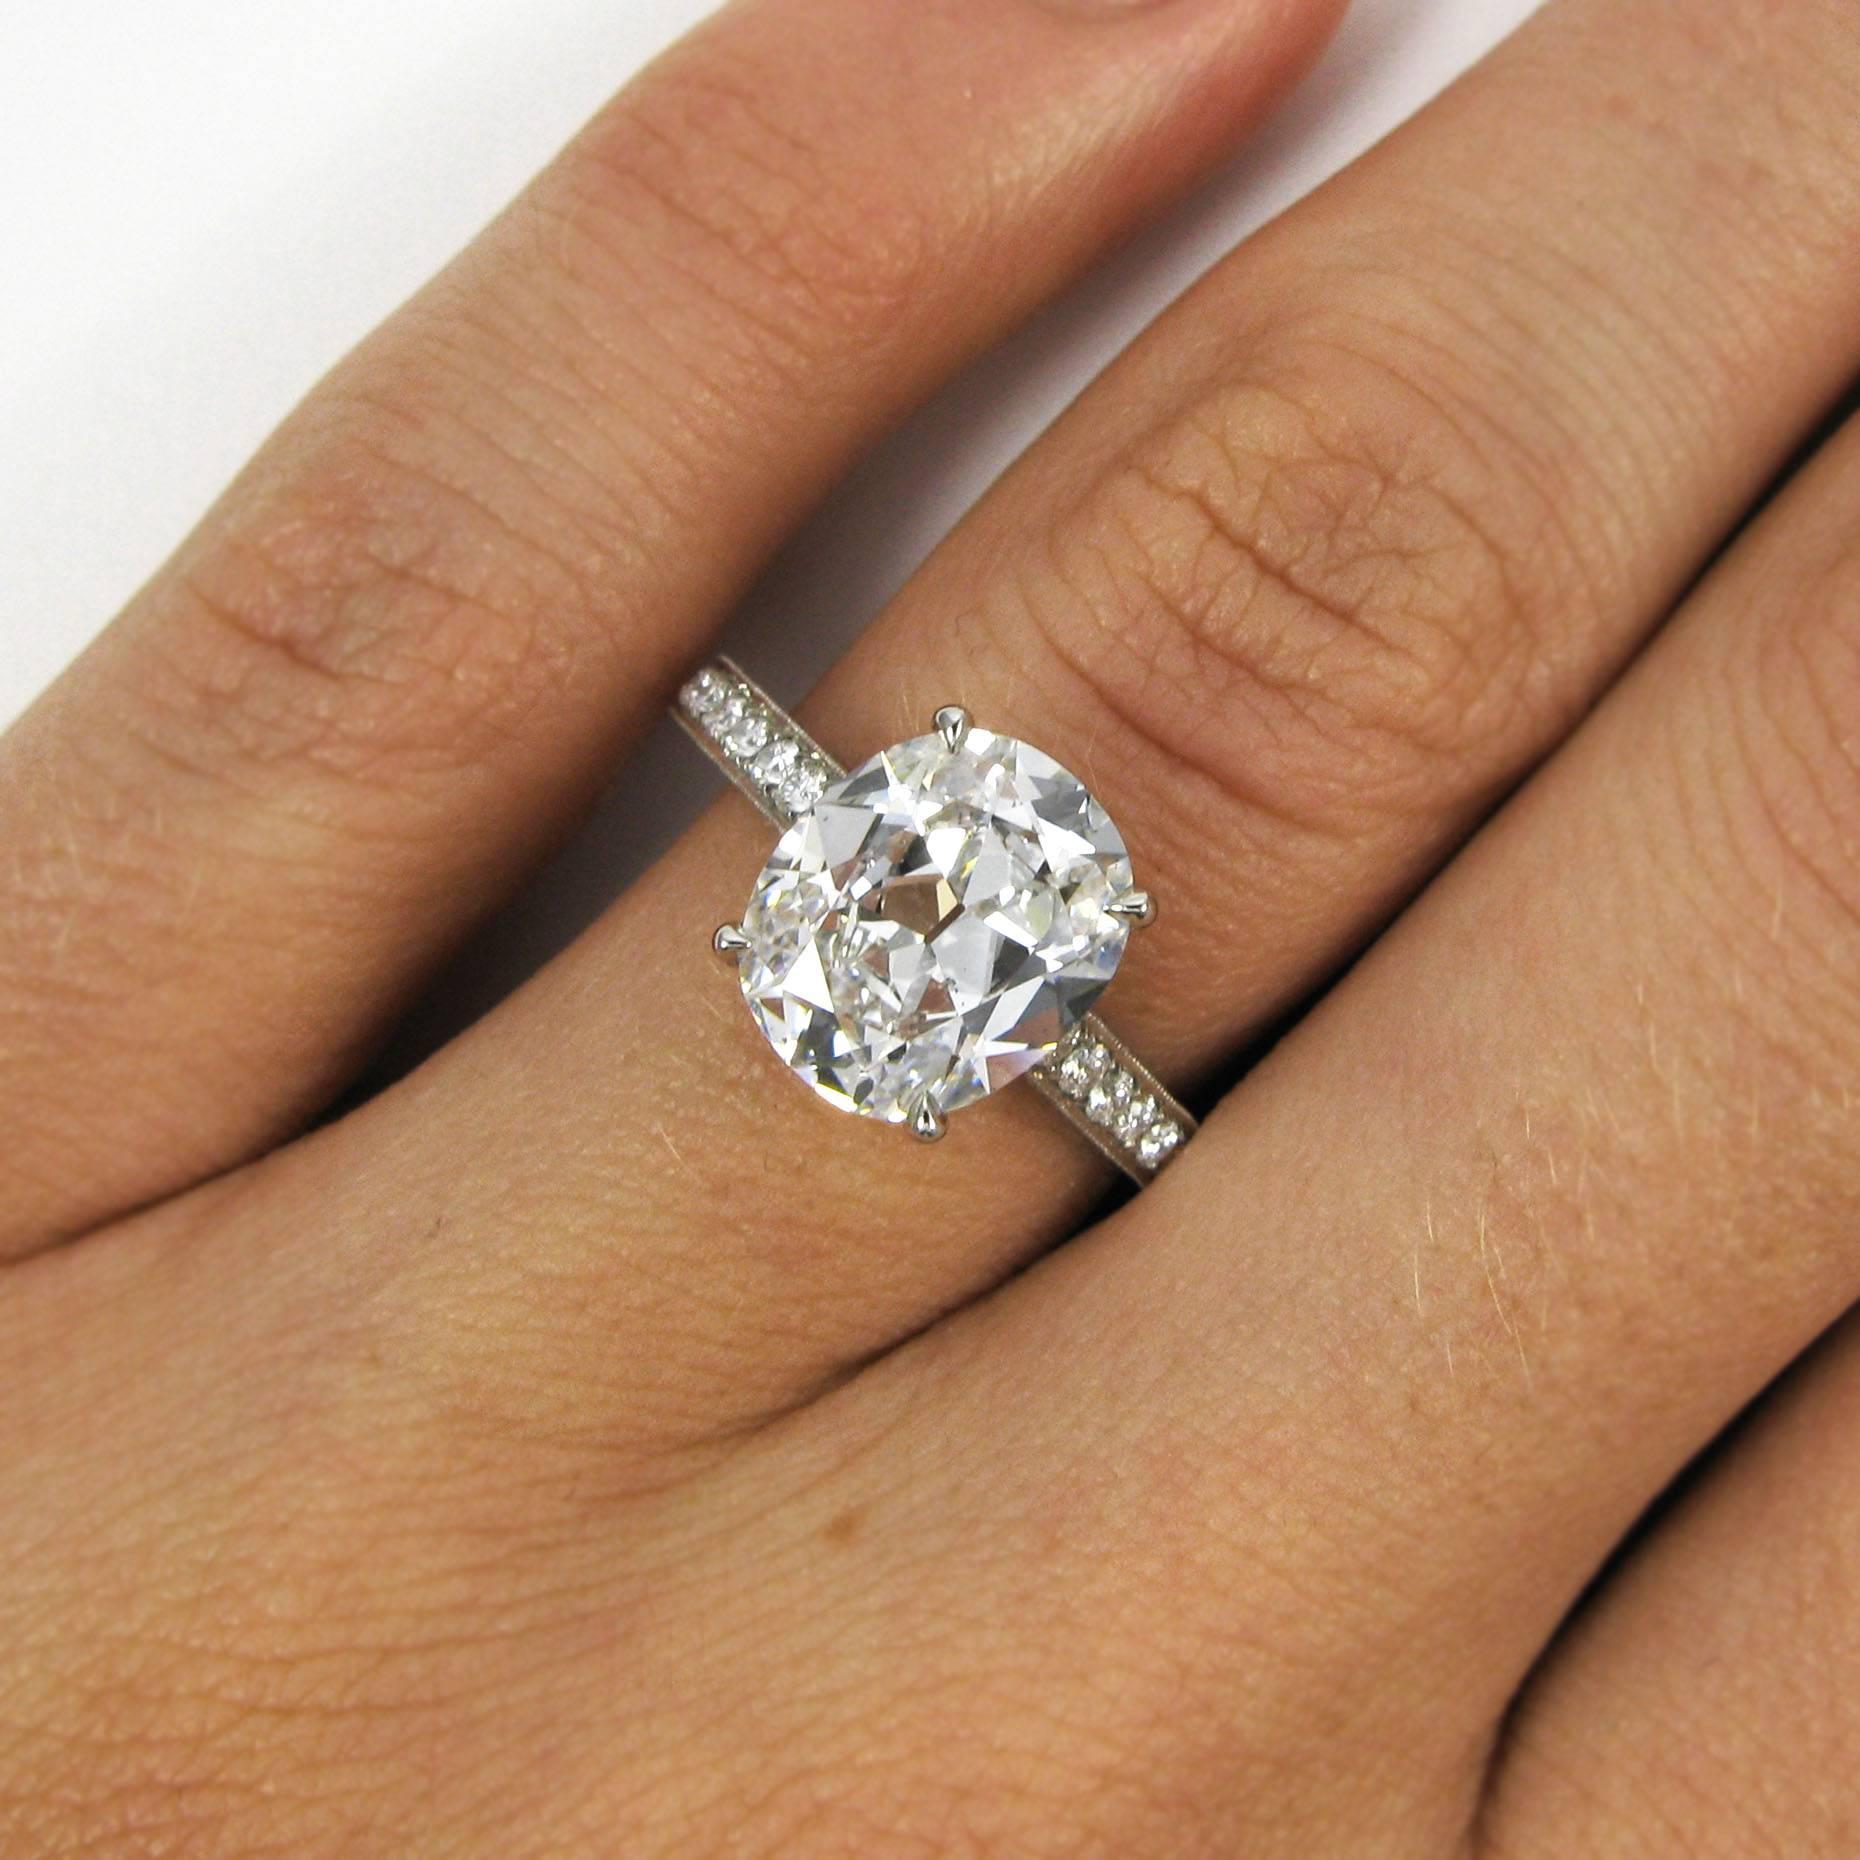 A lovely engagement ring featuring a spready 3.15 carat cushion-cut diamond with D color and SI1 clarity. This unique stone has a vintage appeal, and is set upon a sparkling platinum shank set with 1.09 carats of micro-pave diamonds across all